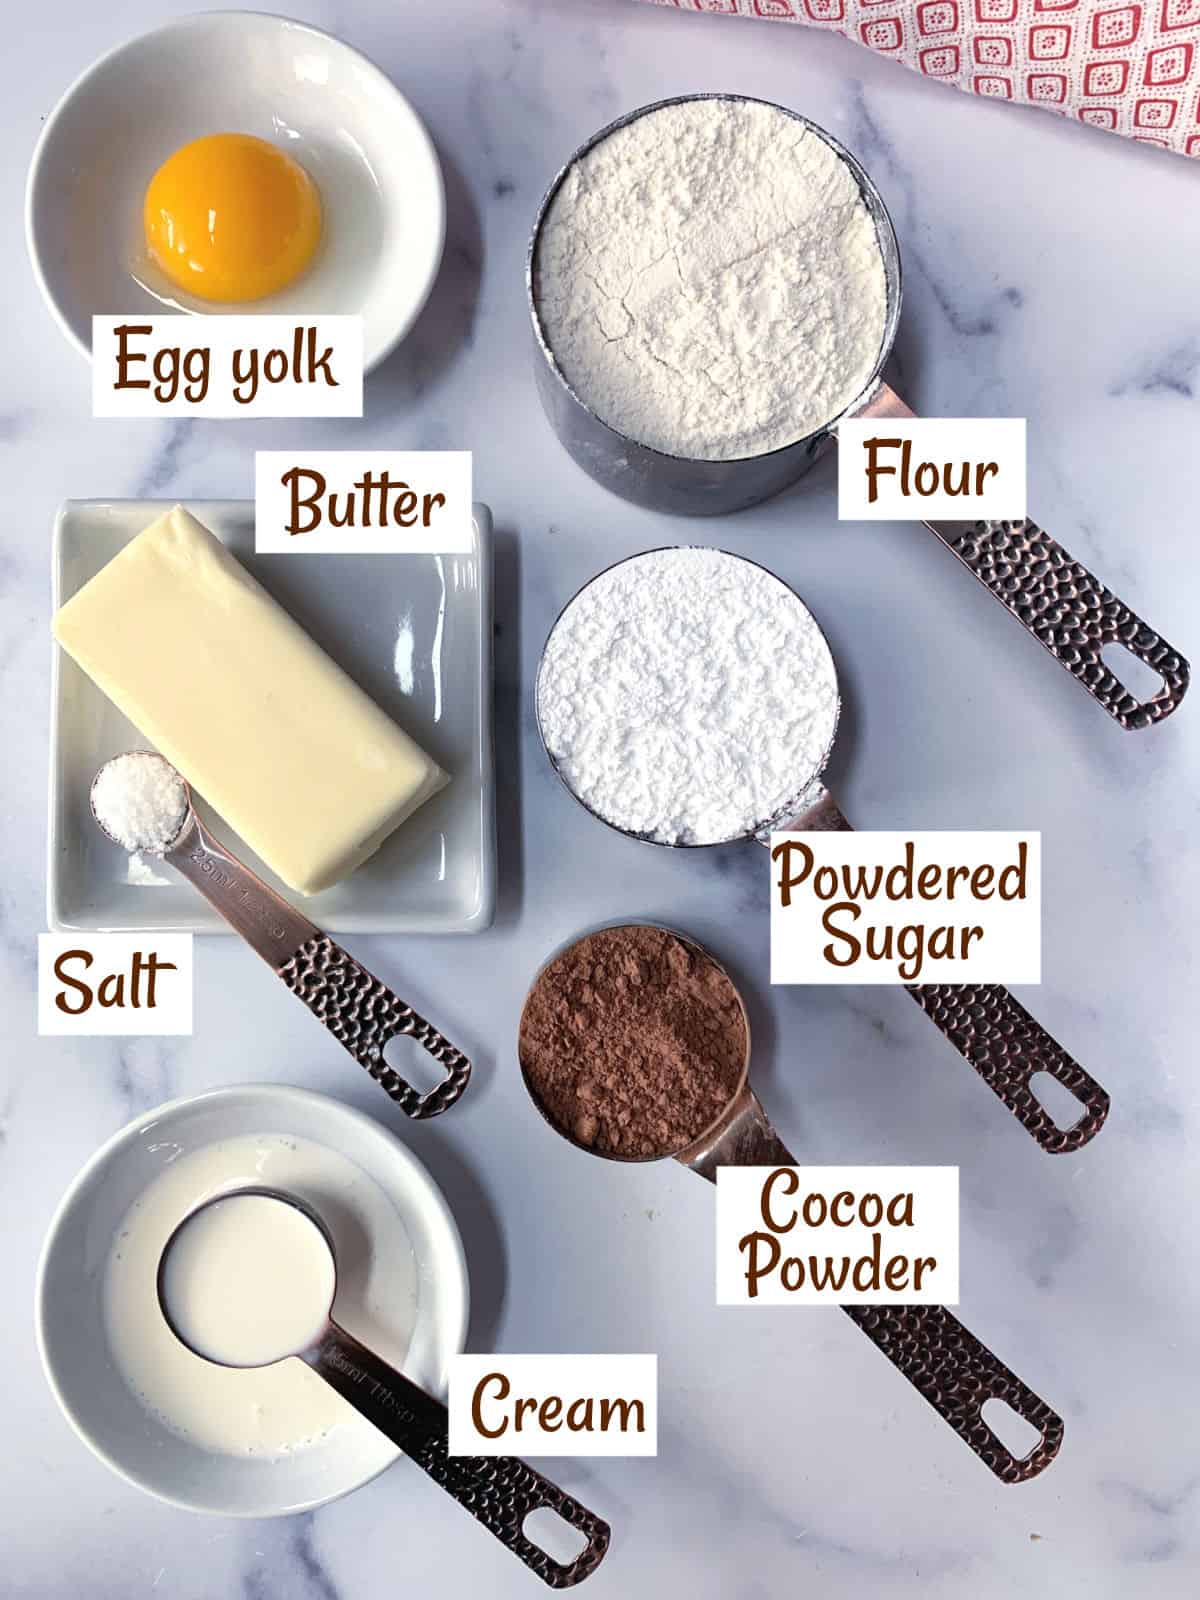 Ingredients to make a chocolate tart shell.